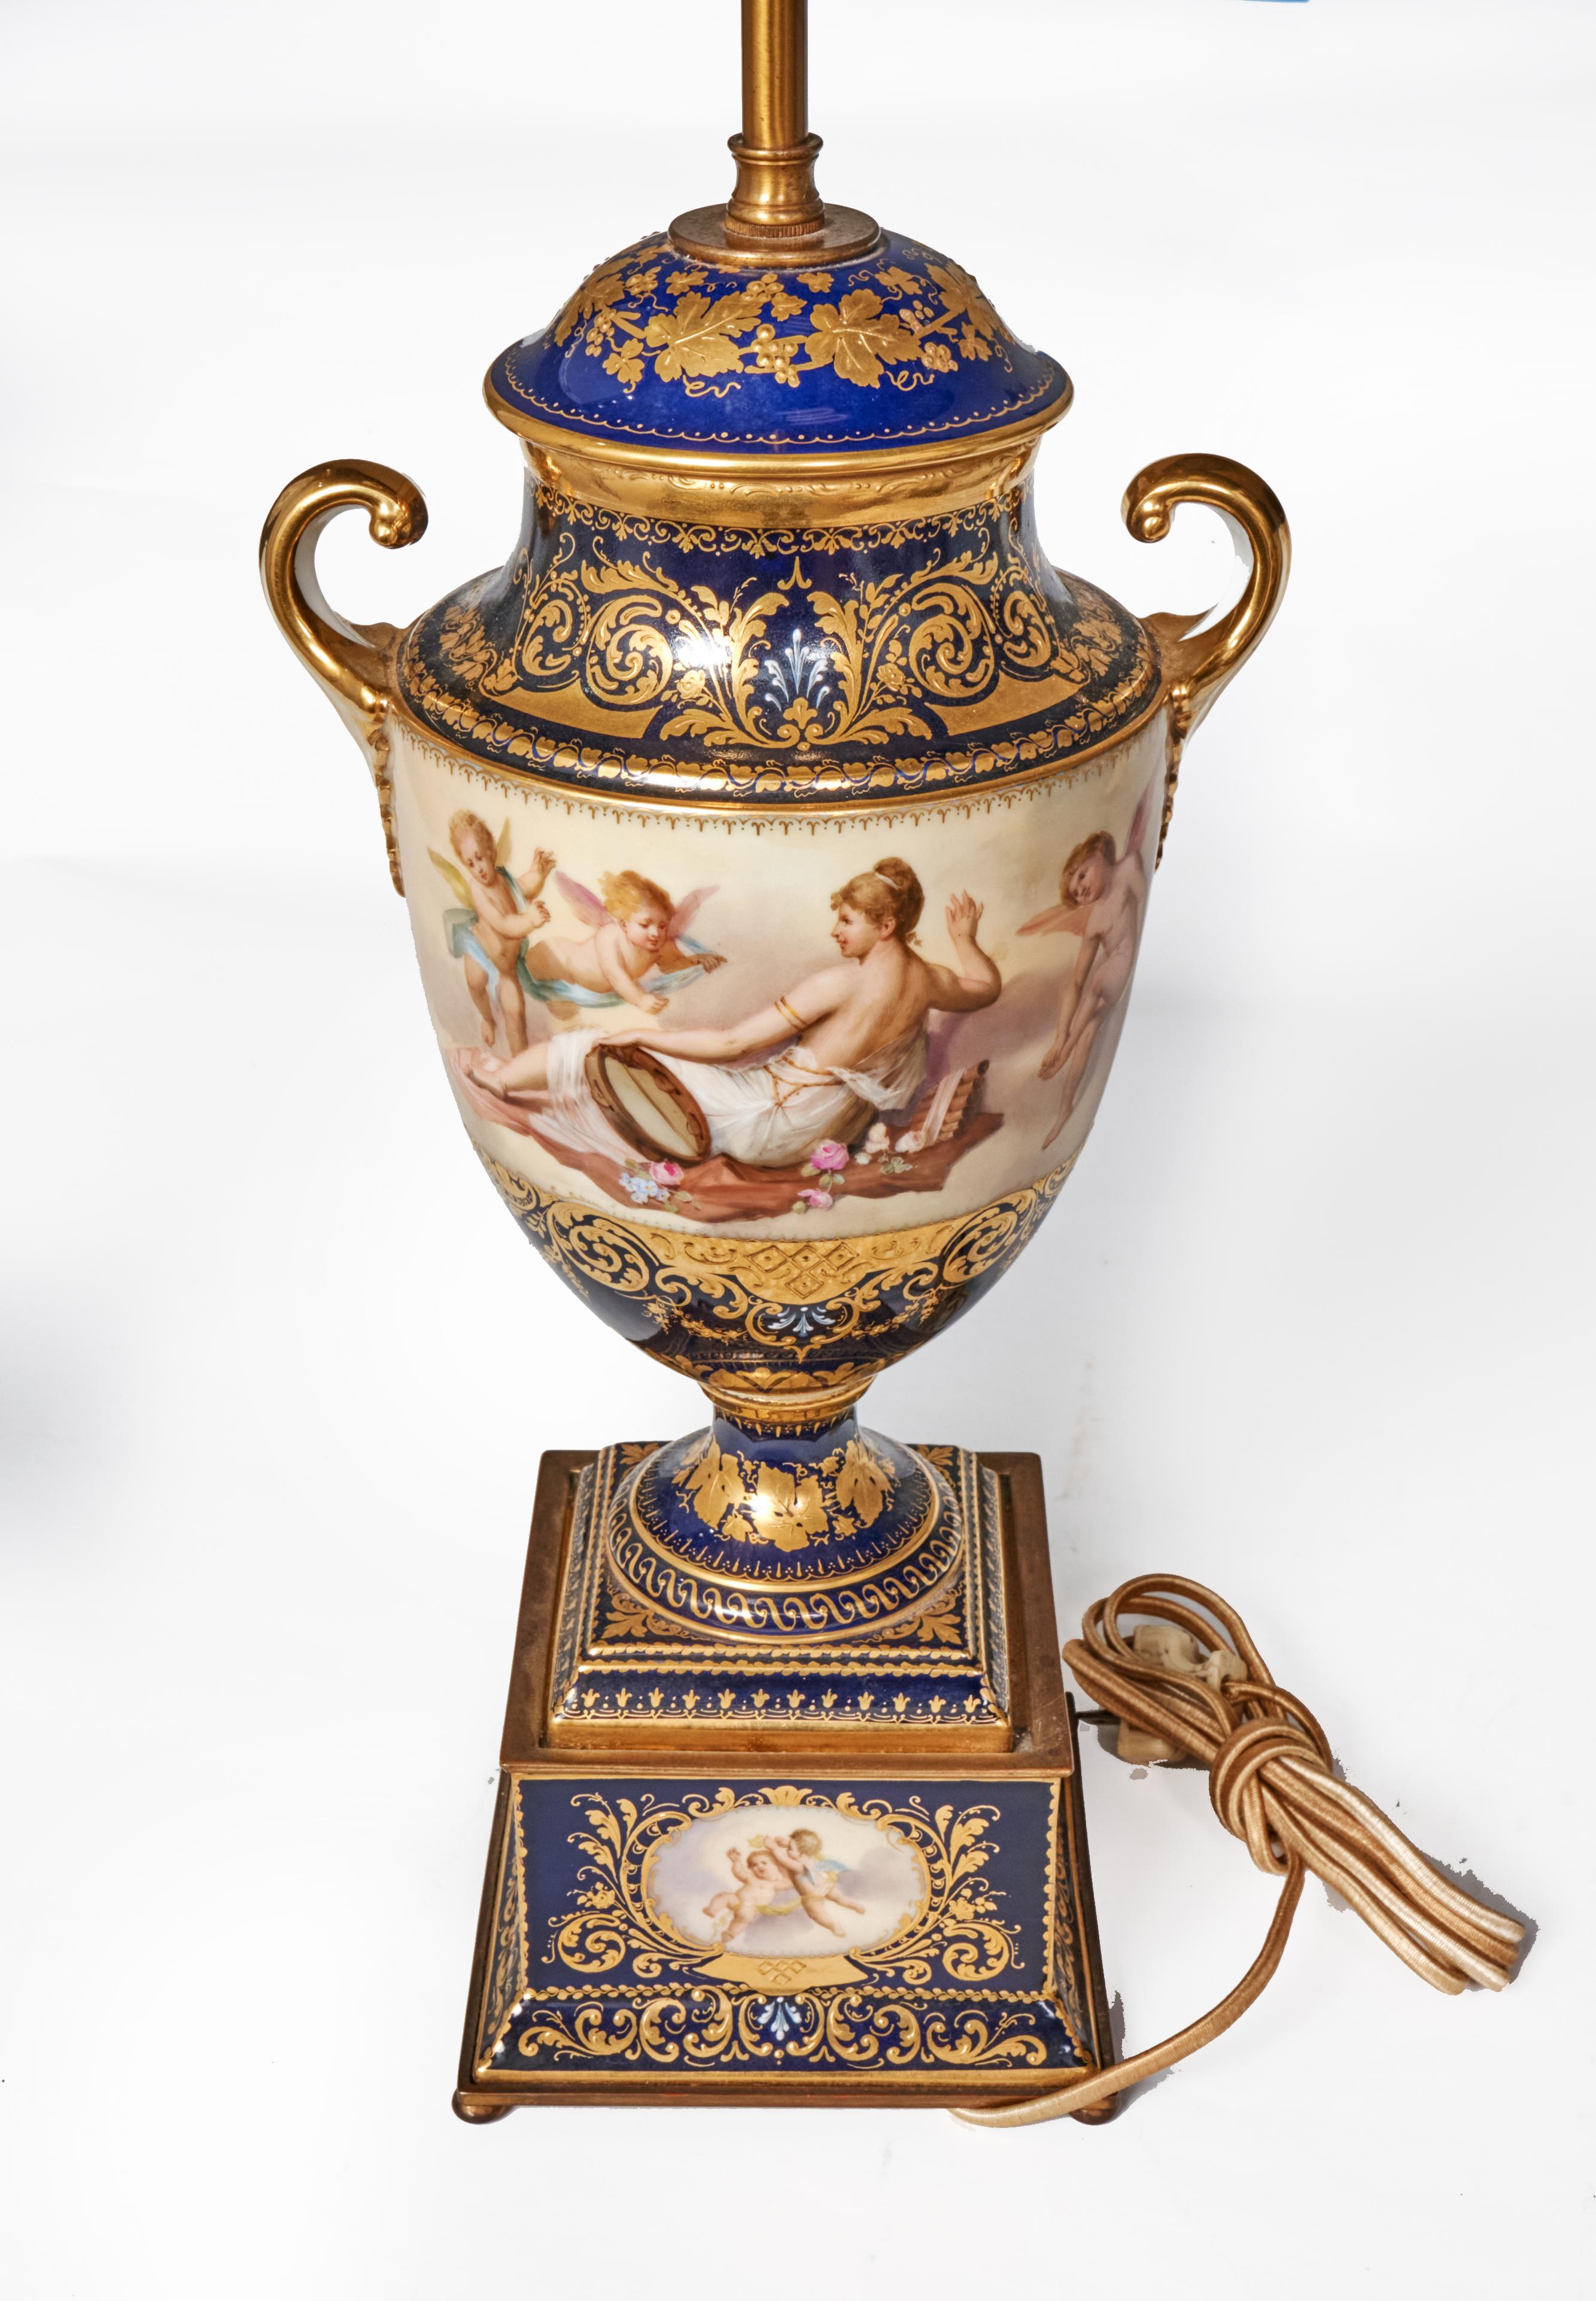 Lovely antique hand painted Royal Vienna table lamp with cobalt blue glaze decorated with gold. Hand painted scenes of frolicking cherubs and a semi-nude young woman. Artist signed as shown in pictures and also signed on the bottom.
Lamps are urn